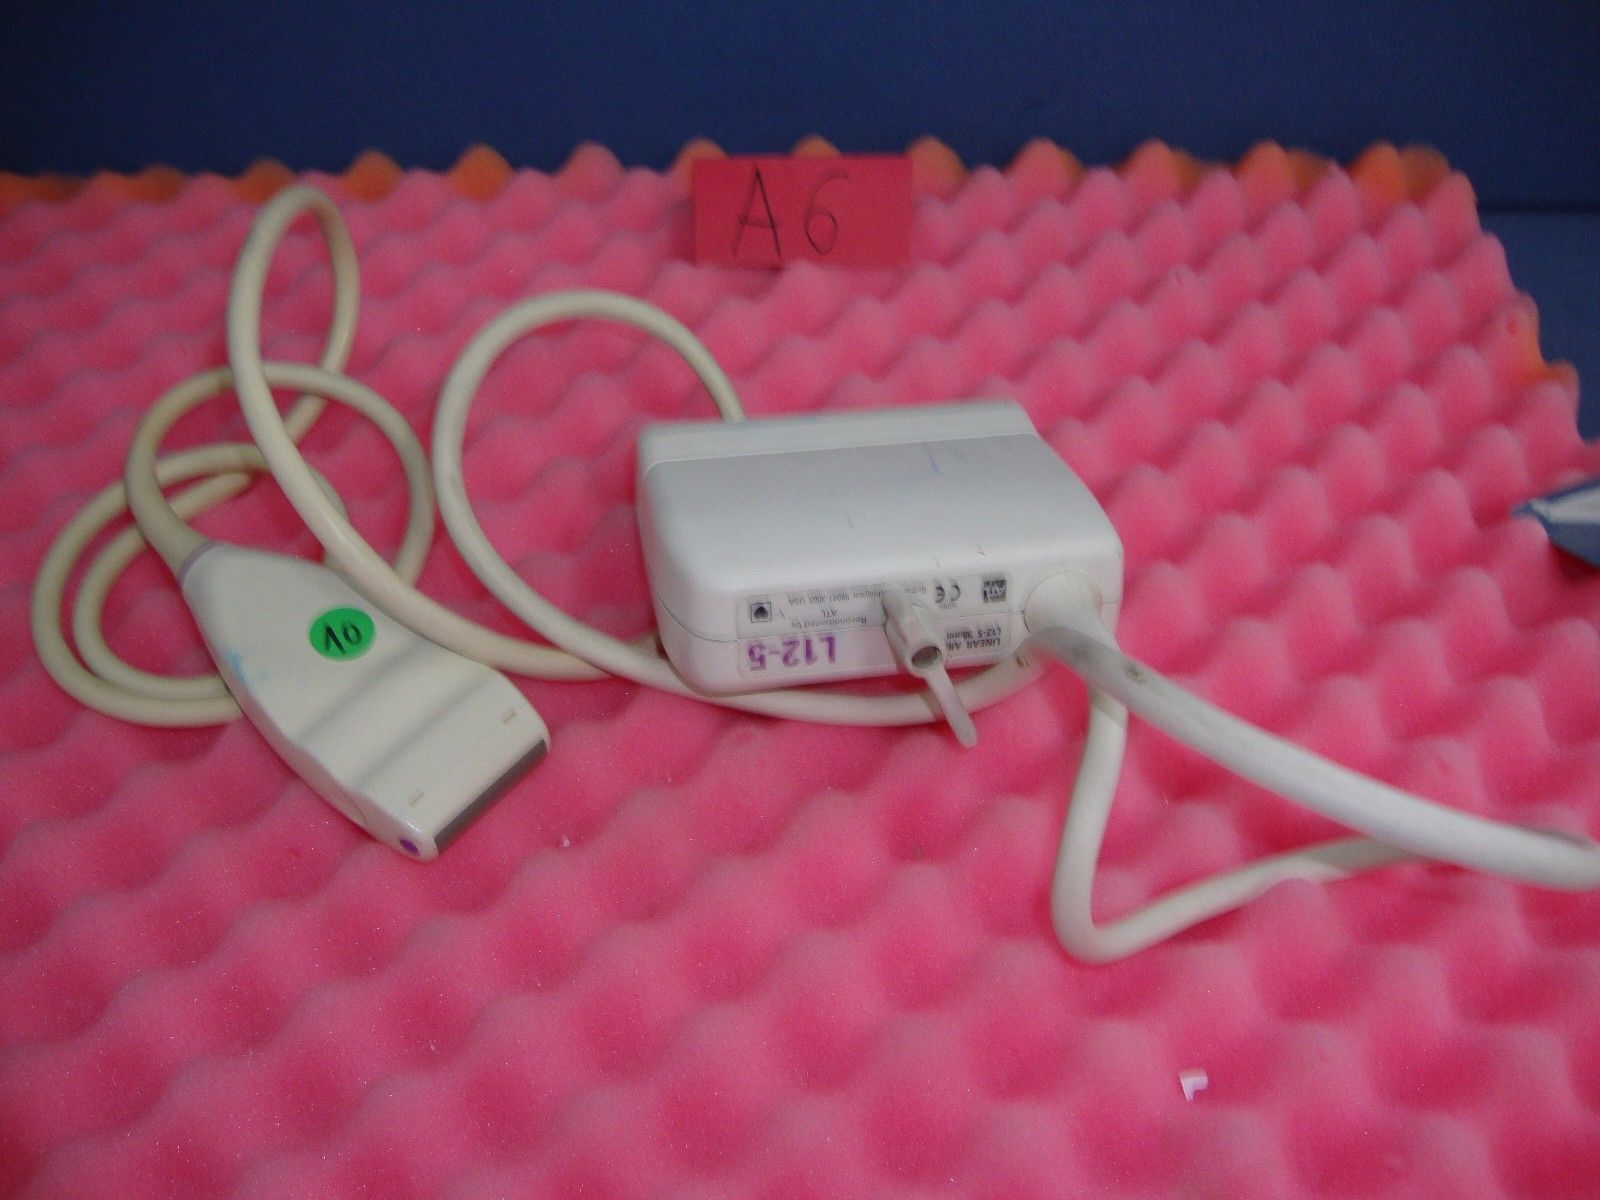 a white probe  on a pink surface